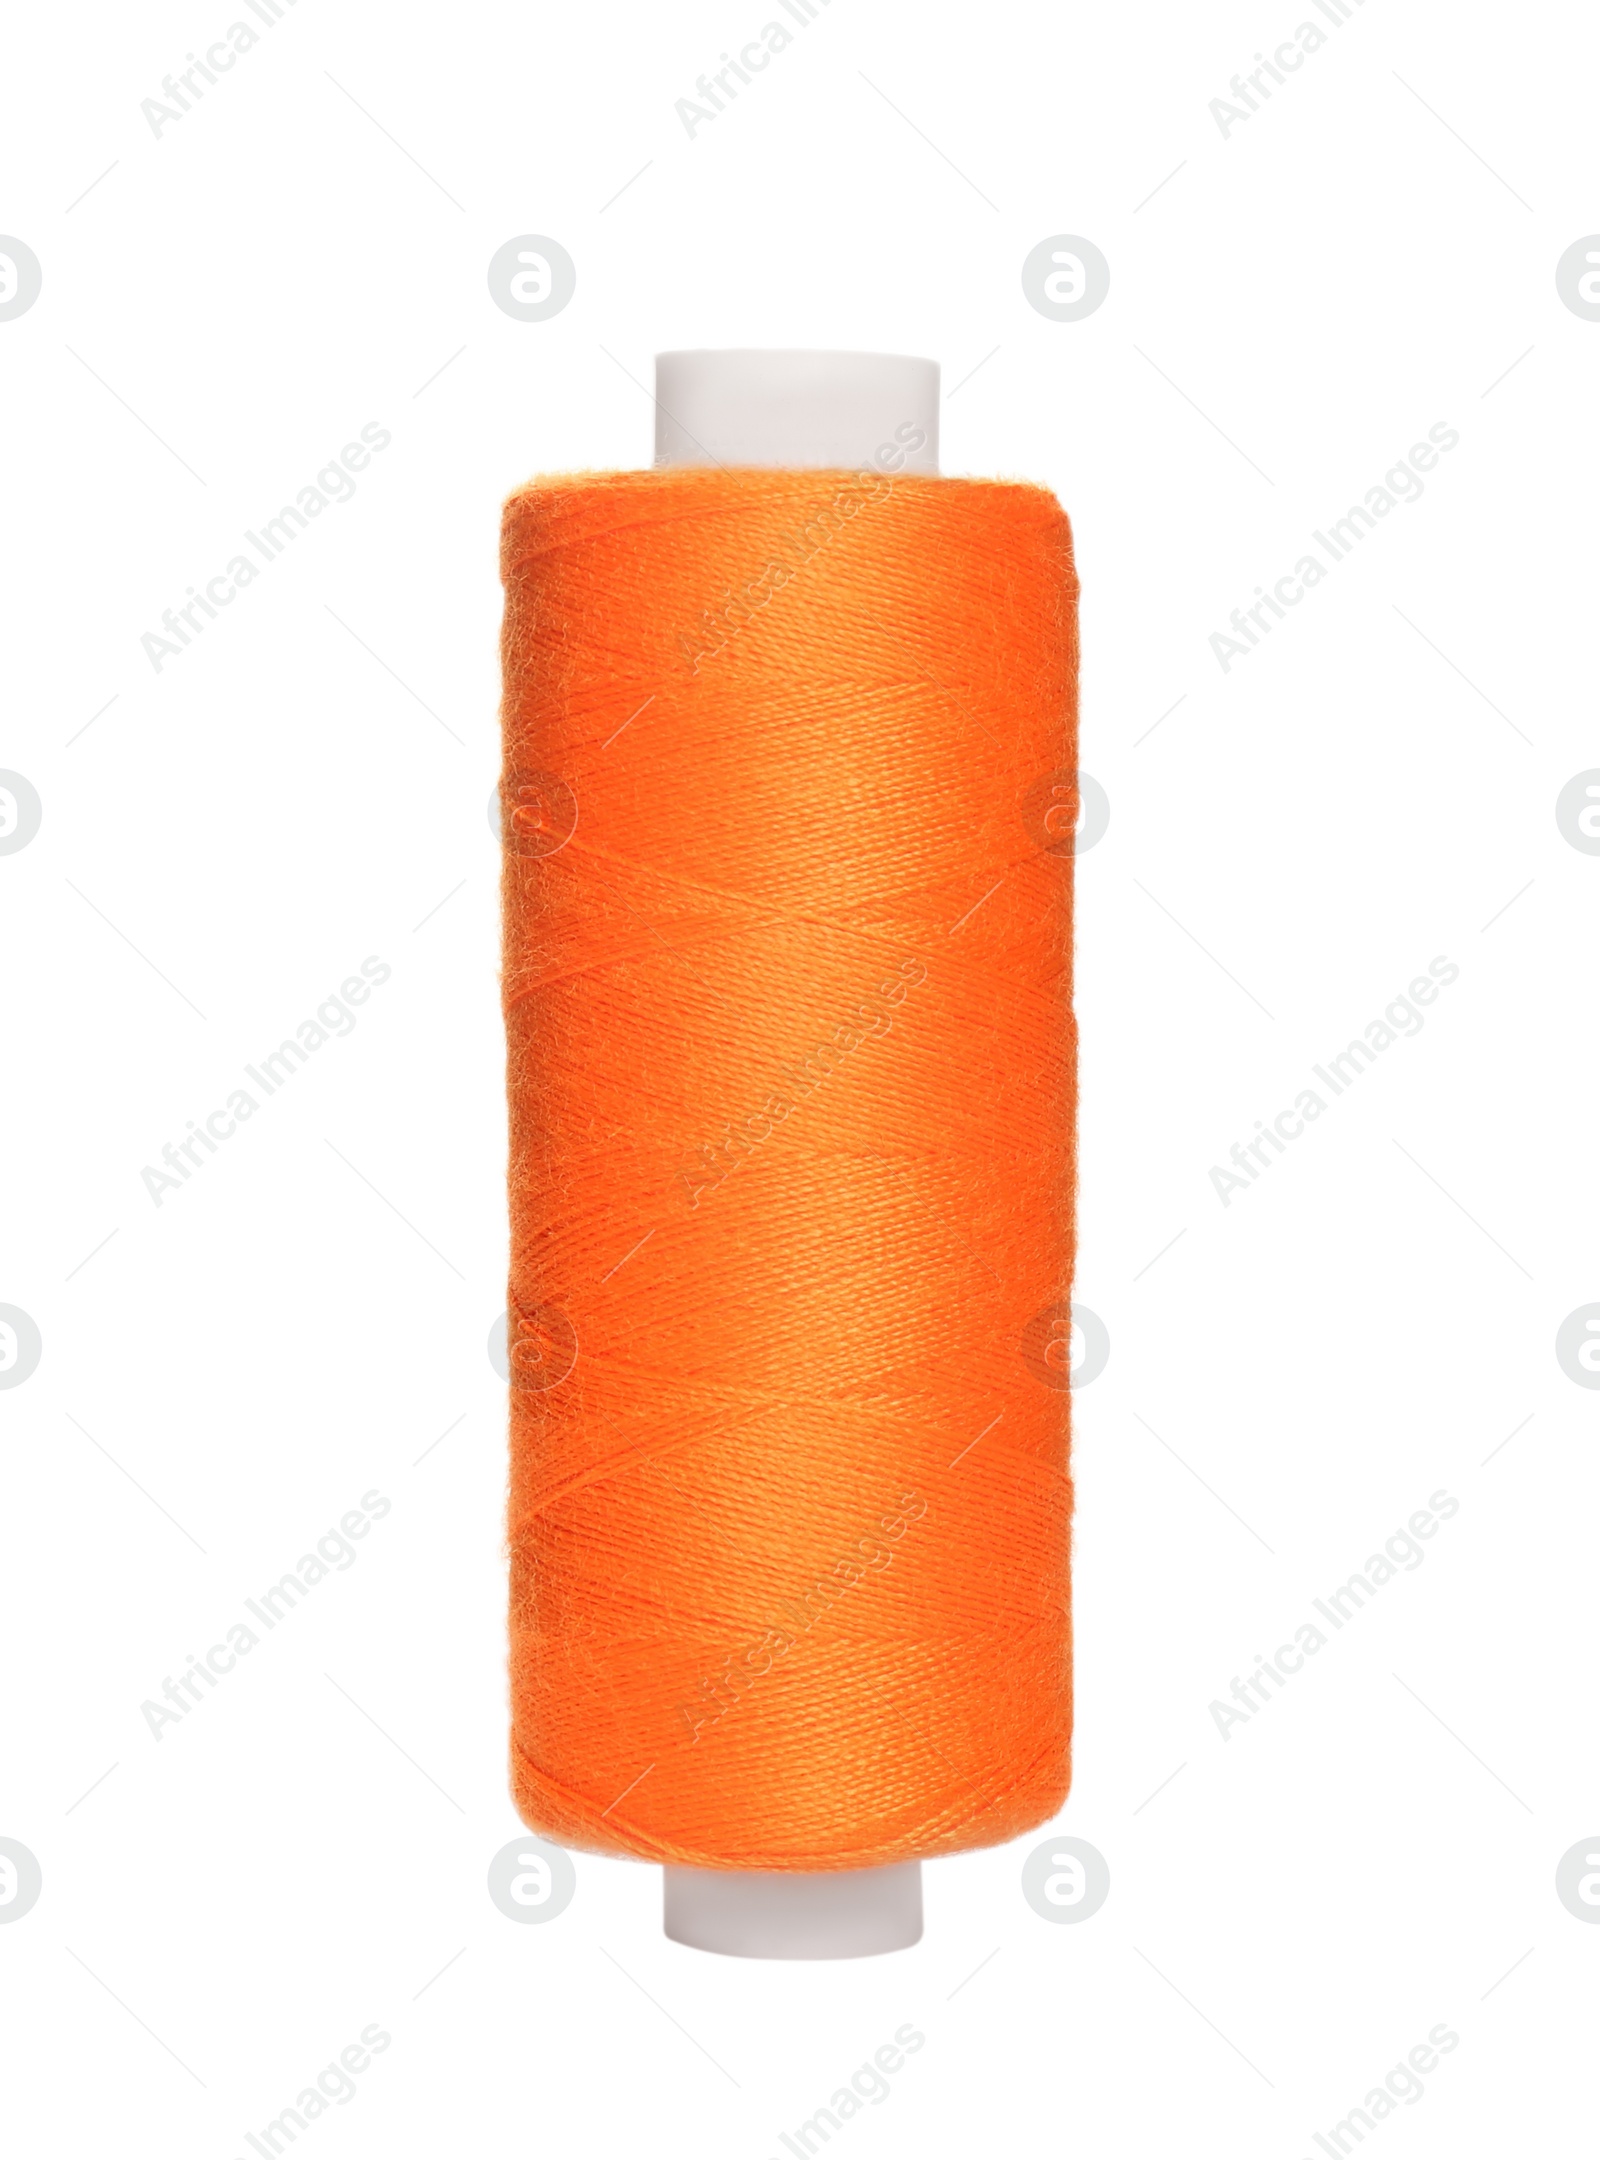 Photo of Spool of orange sewing thread isolated on white